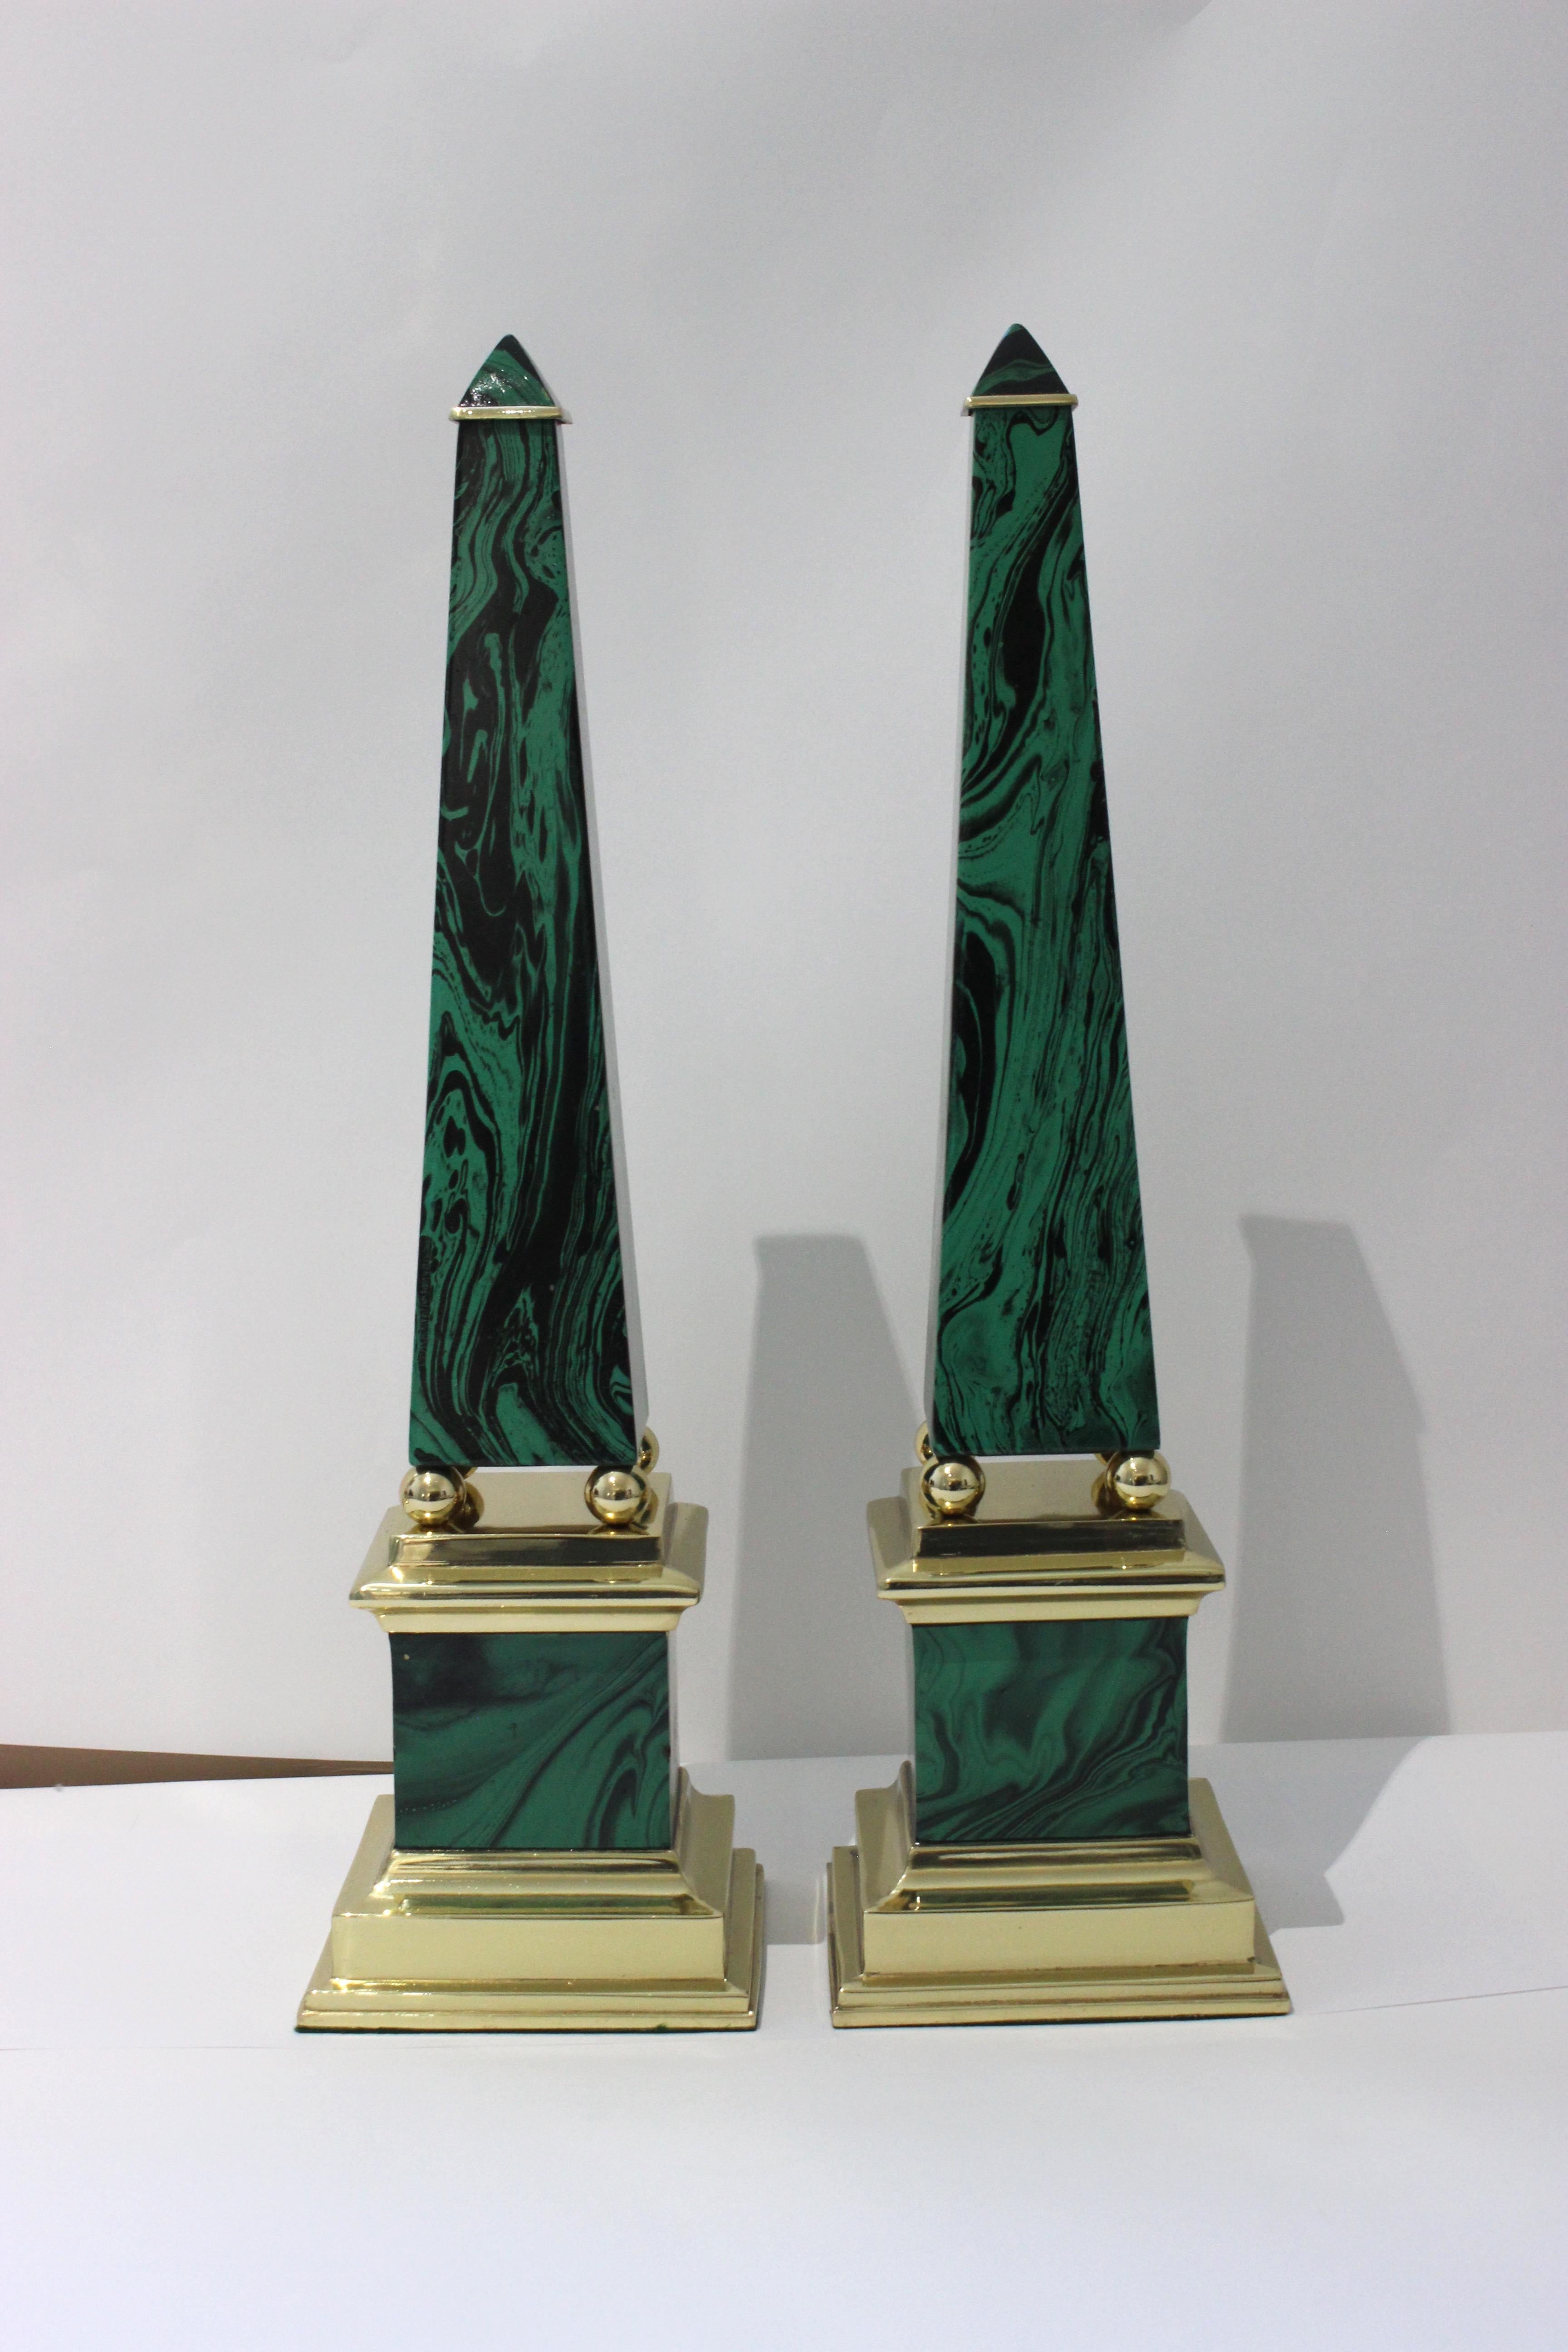 Hand-Crafted Pair of Egyptian Revival Oblelisks by Chapman For Sale